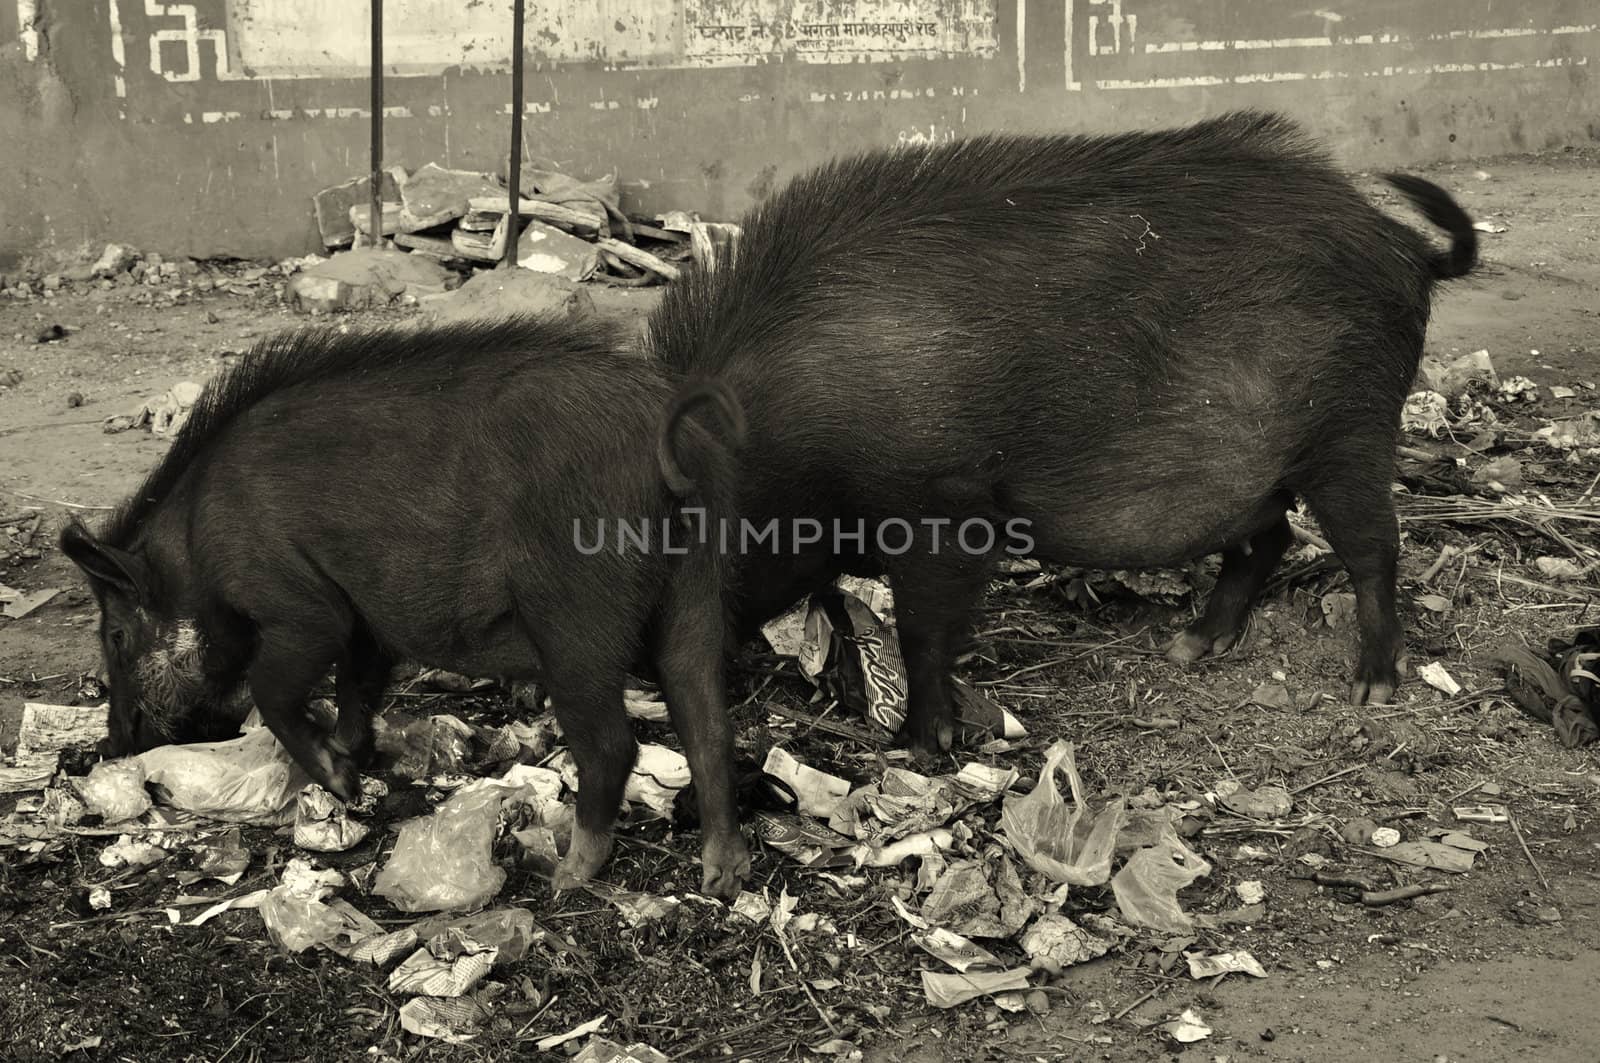 Pigs feasting on garbage on the streets of Jaipur, India